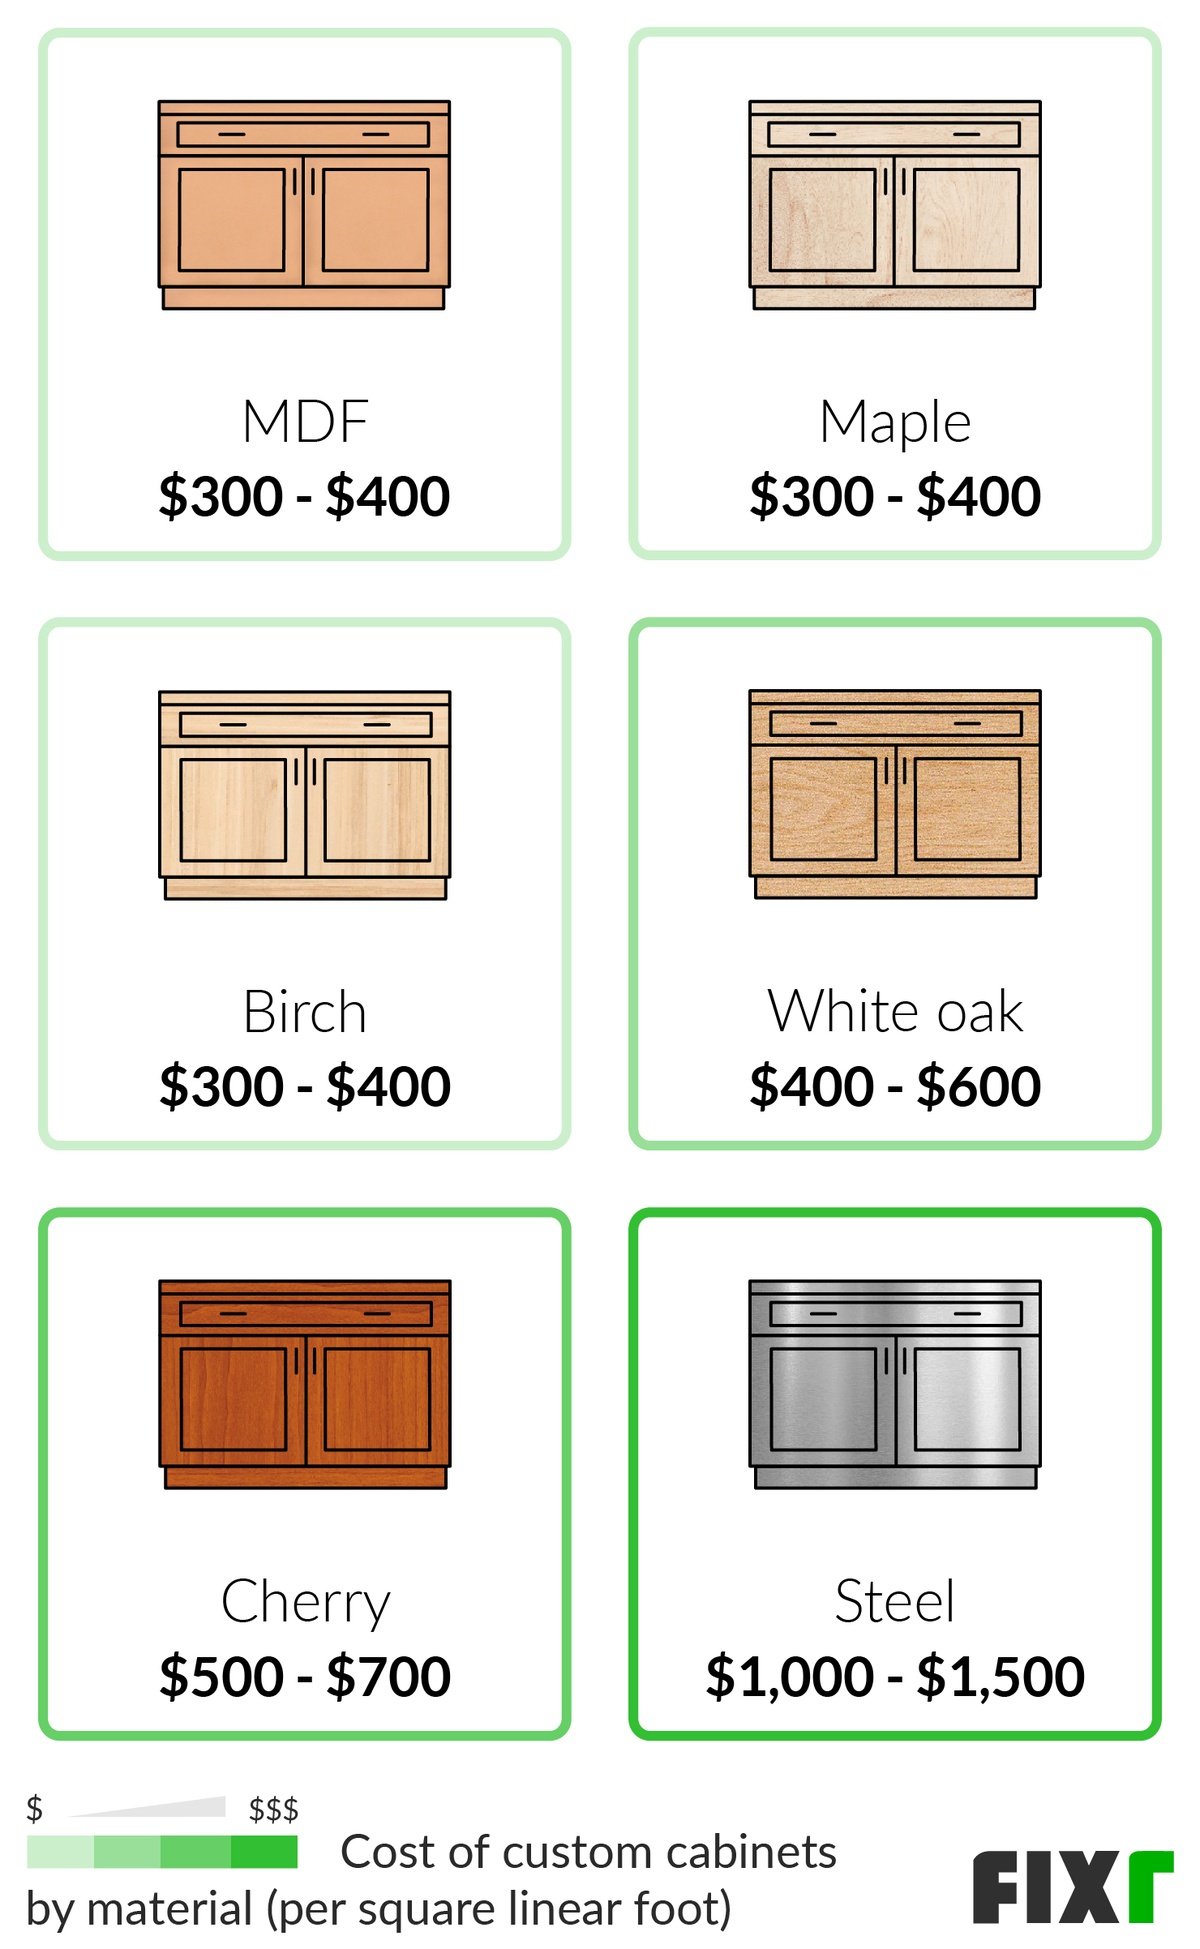 Cost To Install Custom Cabinets, Average Pay For Custom Cabinet Maker